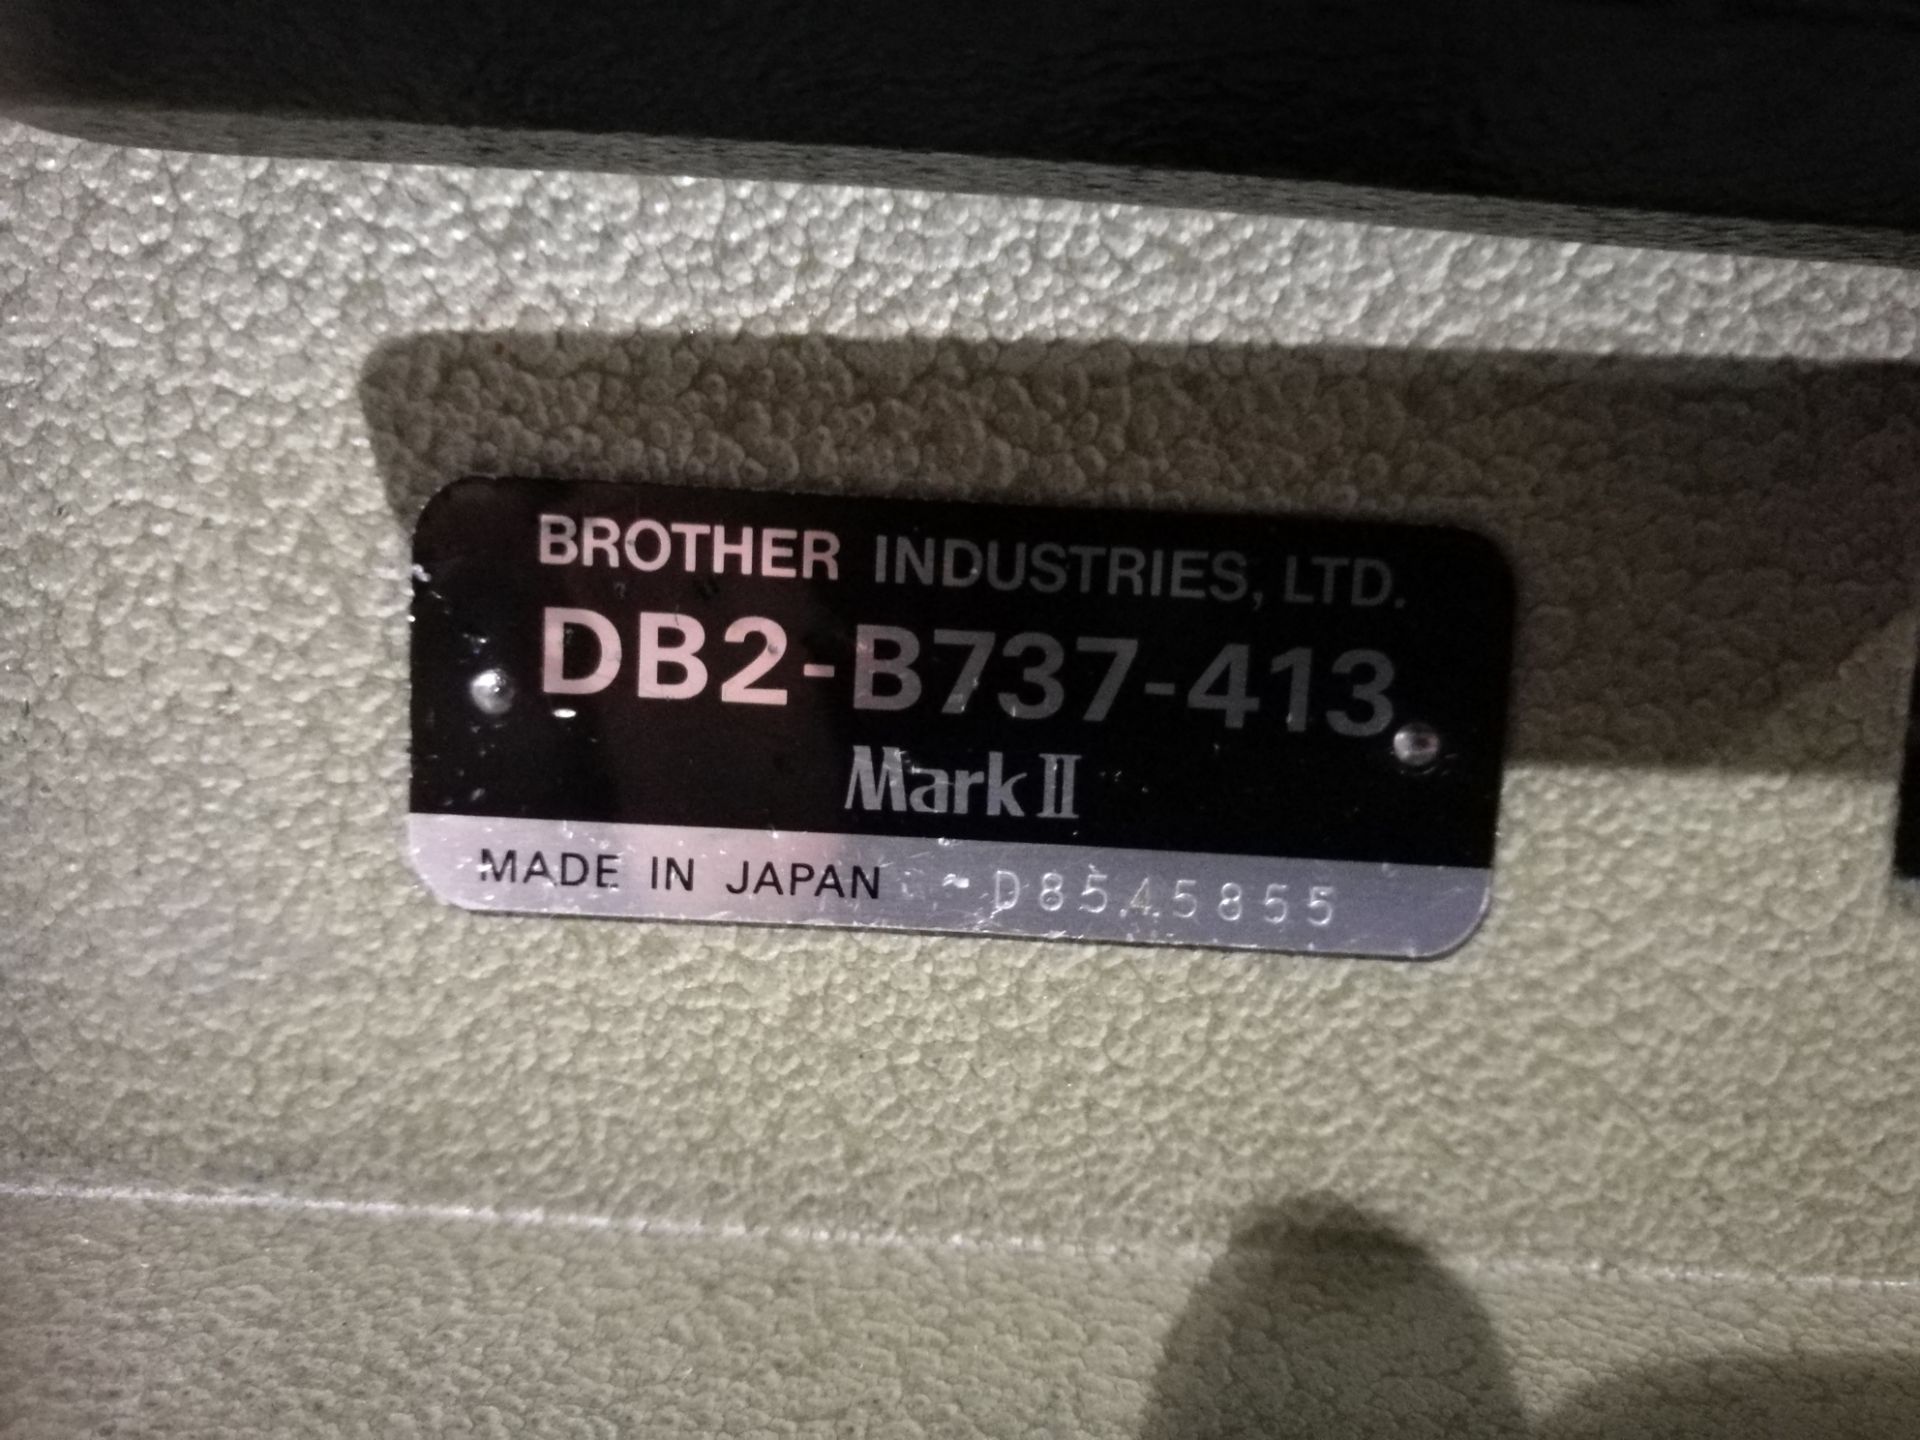 Brother DB2-B737-413 Automatic Industrial Sewing Machine - Image 2 of 2